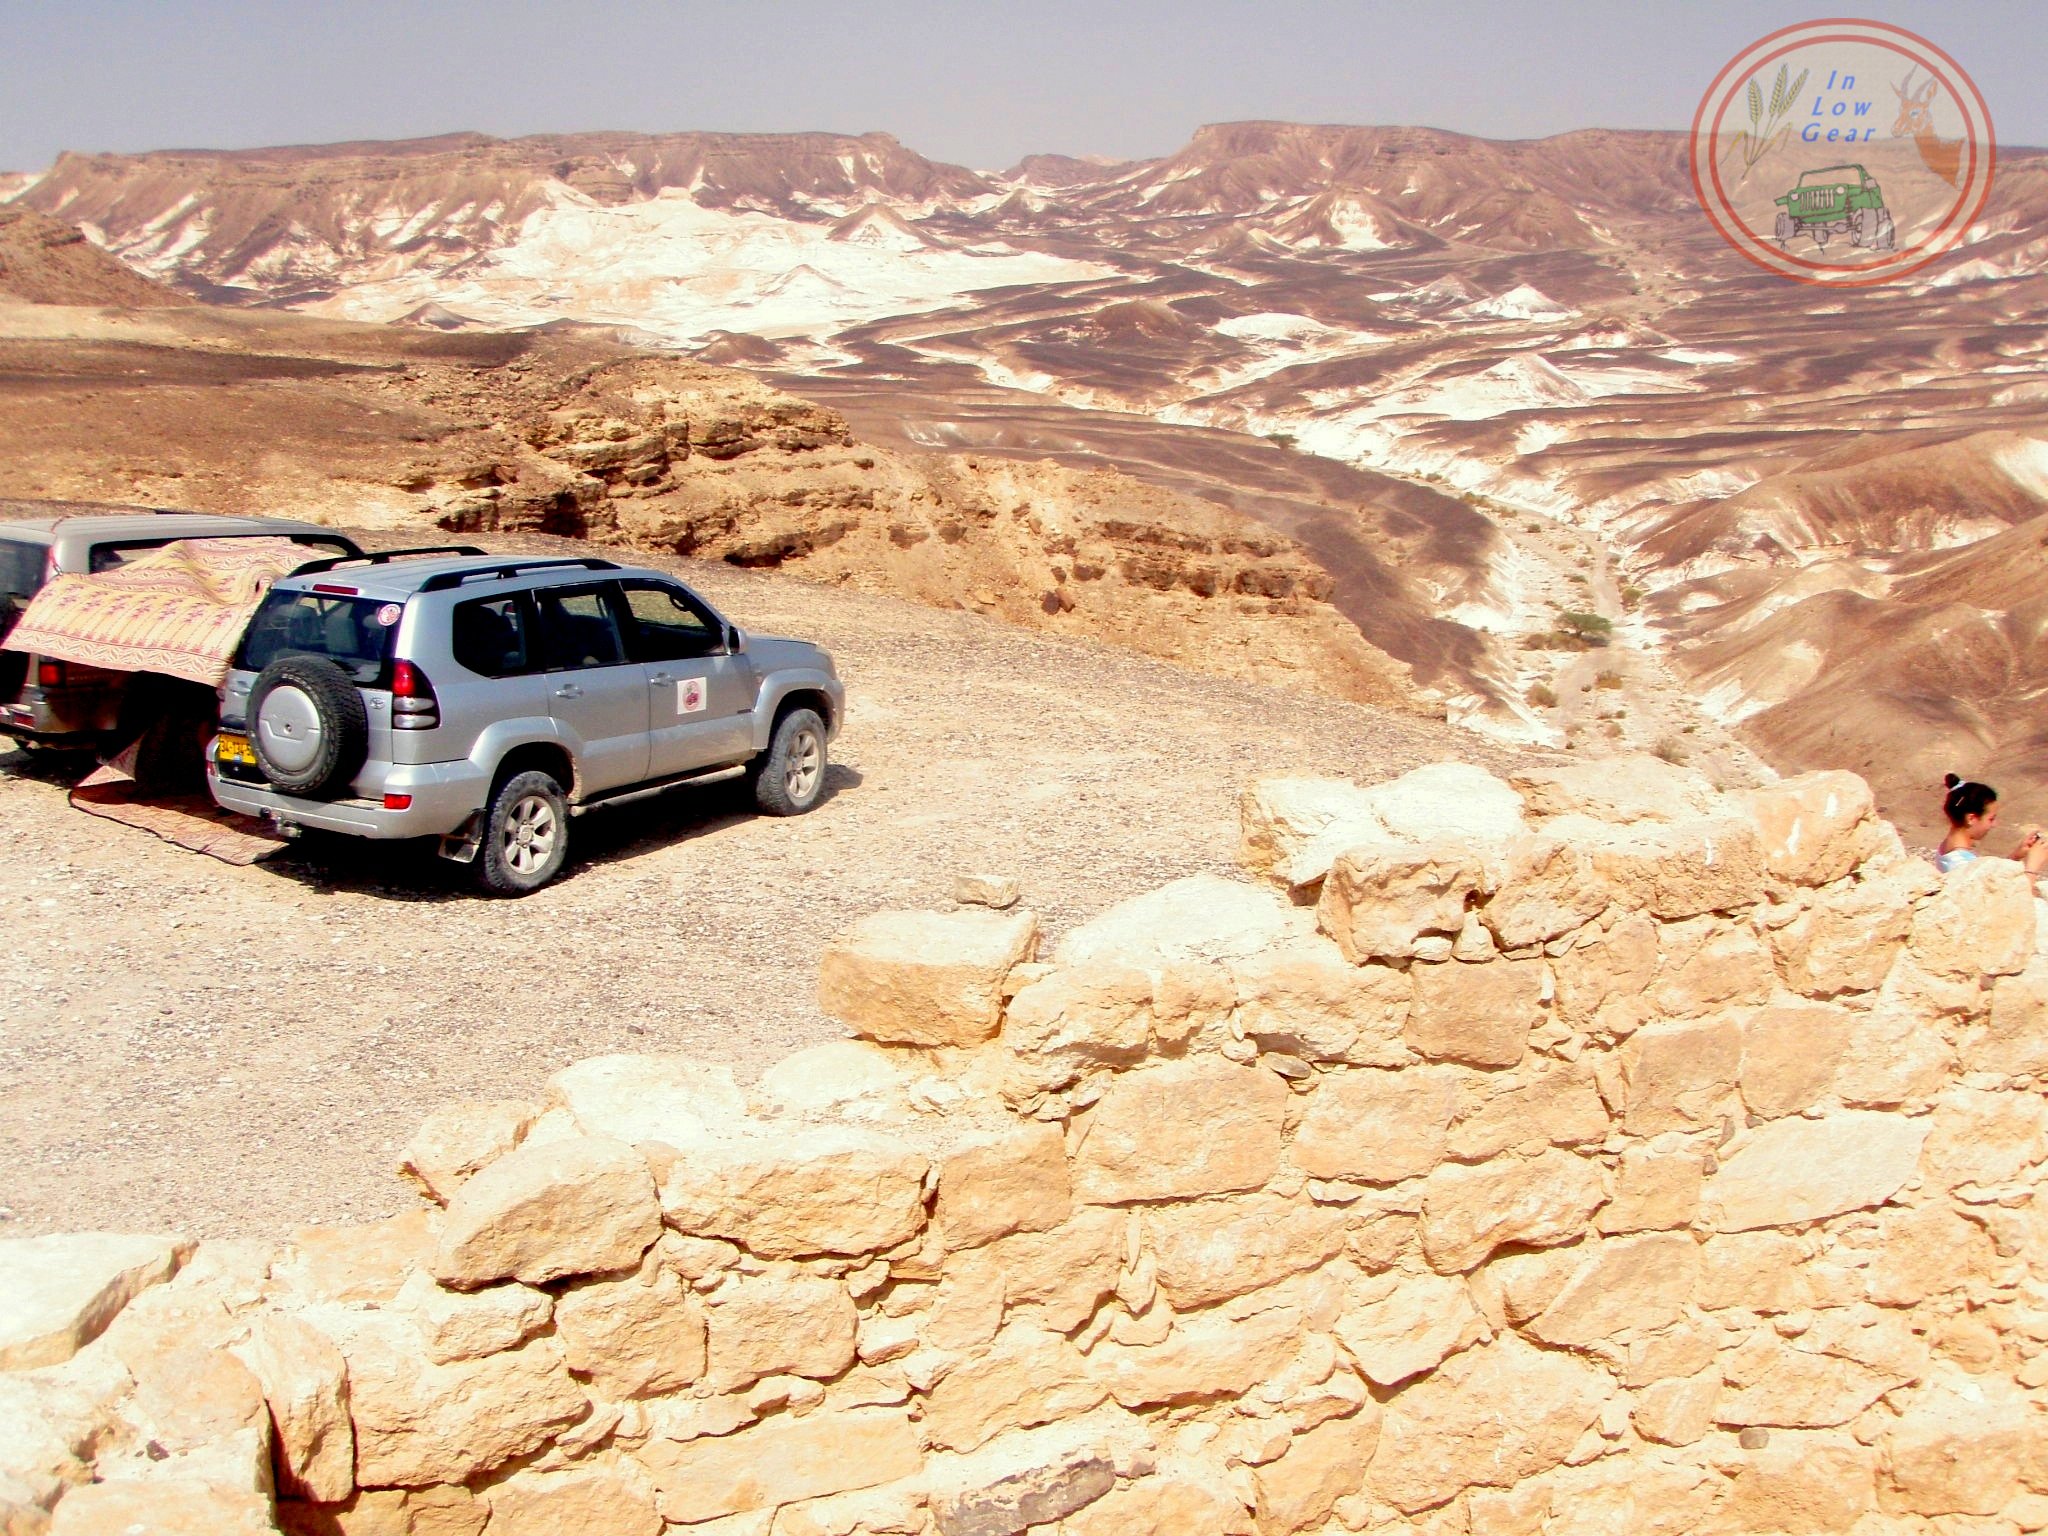 Negev jeep tours: Nabati Incense Rout, One of the most powerful sites for Mahamudra meditation.